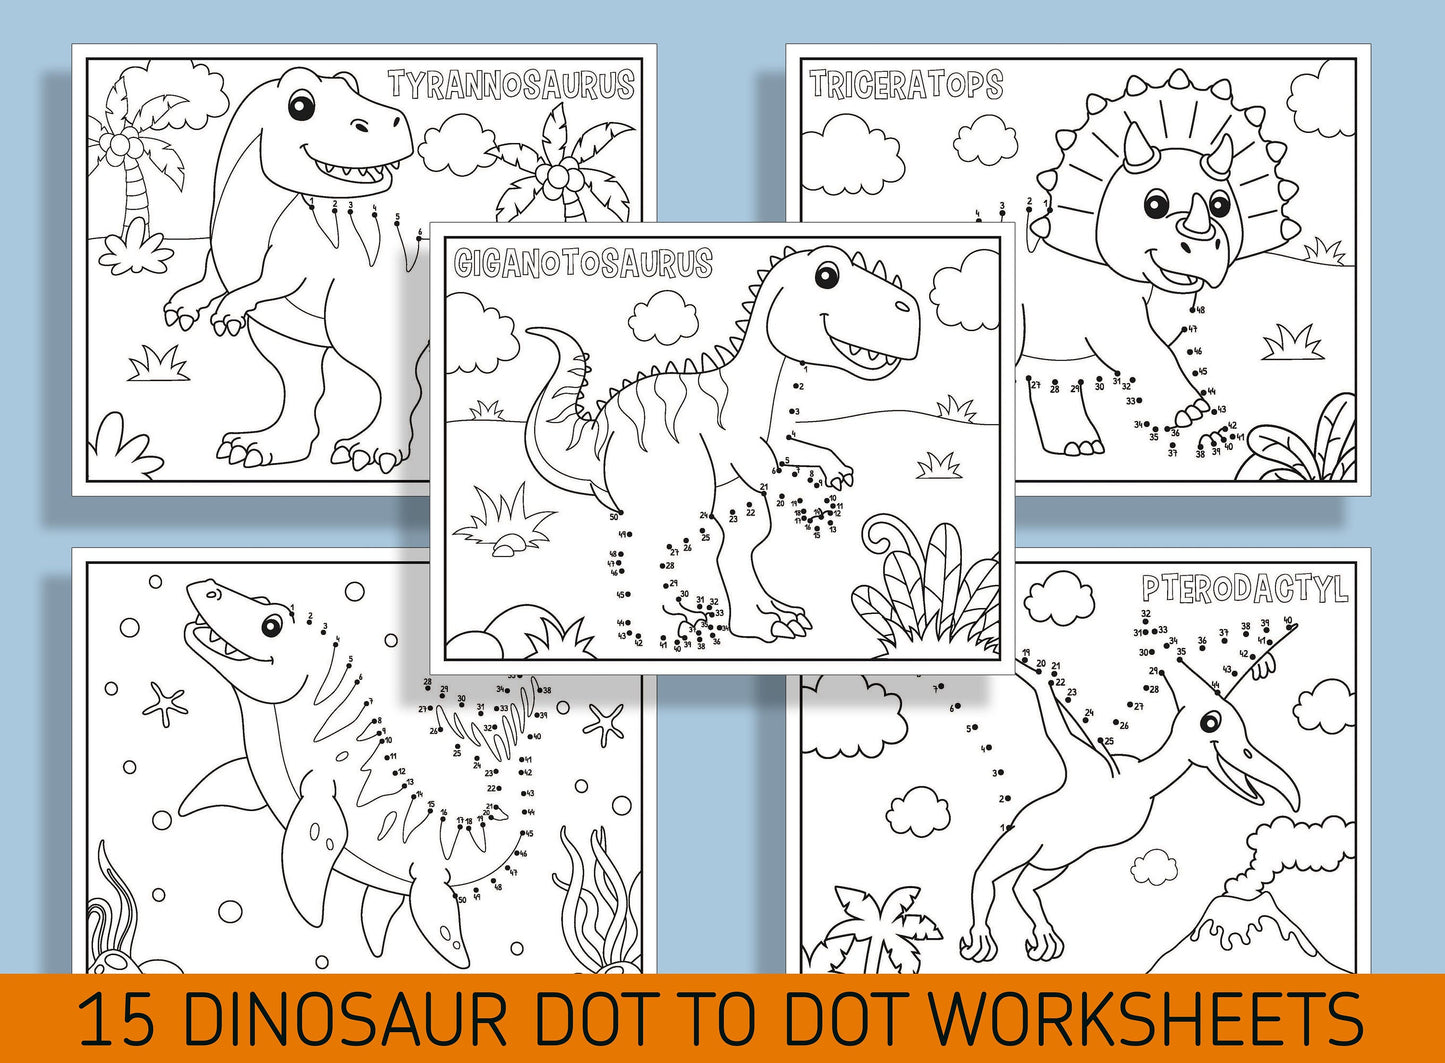 Roar into Learning with 15 Dinosaur Dot-to-Dot Worksheets: Perfect for Preschool & Kindergarten Fun and Education, PDF File/Instant Download